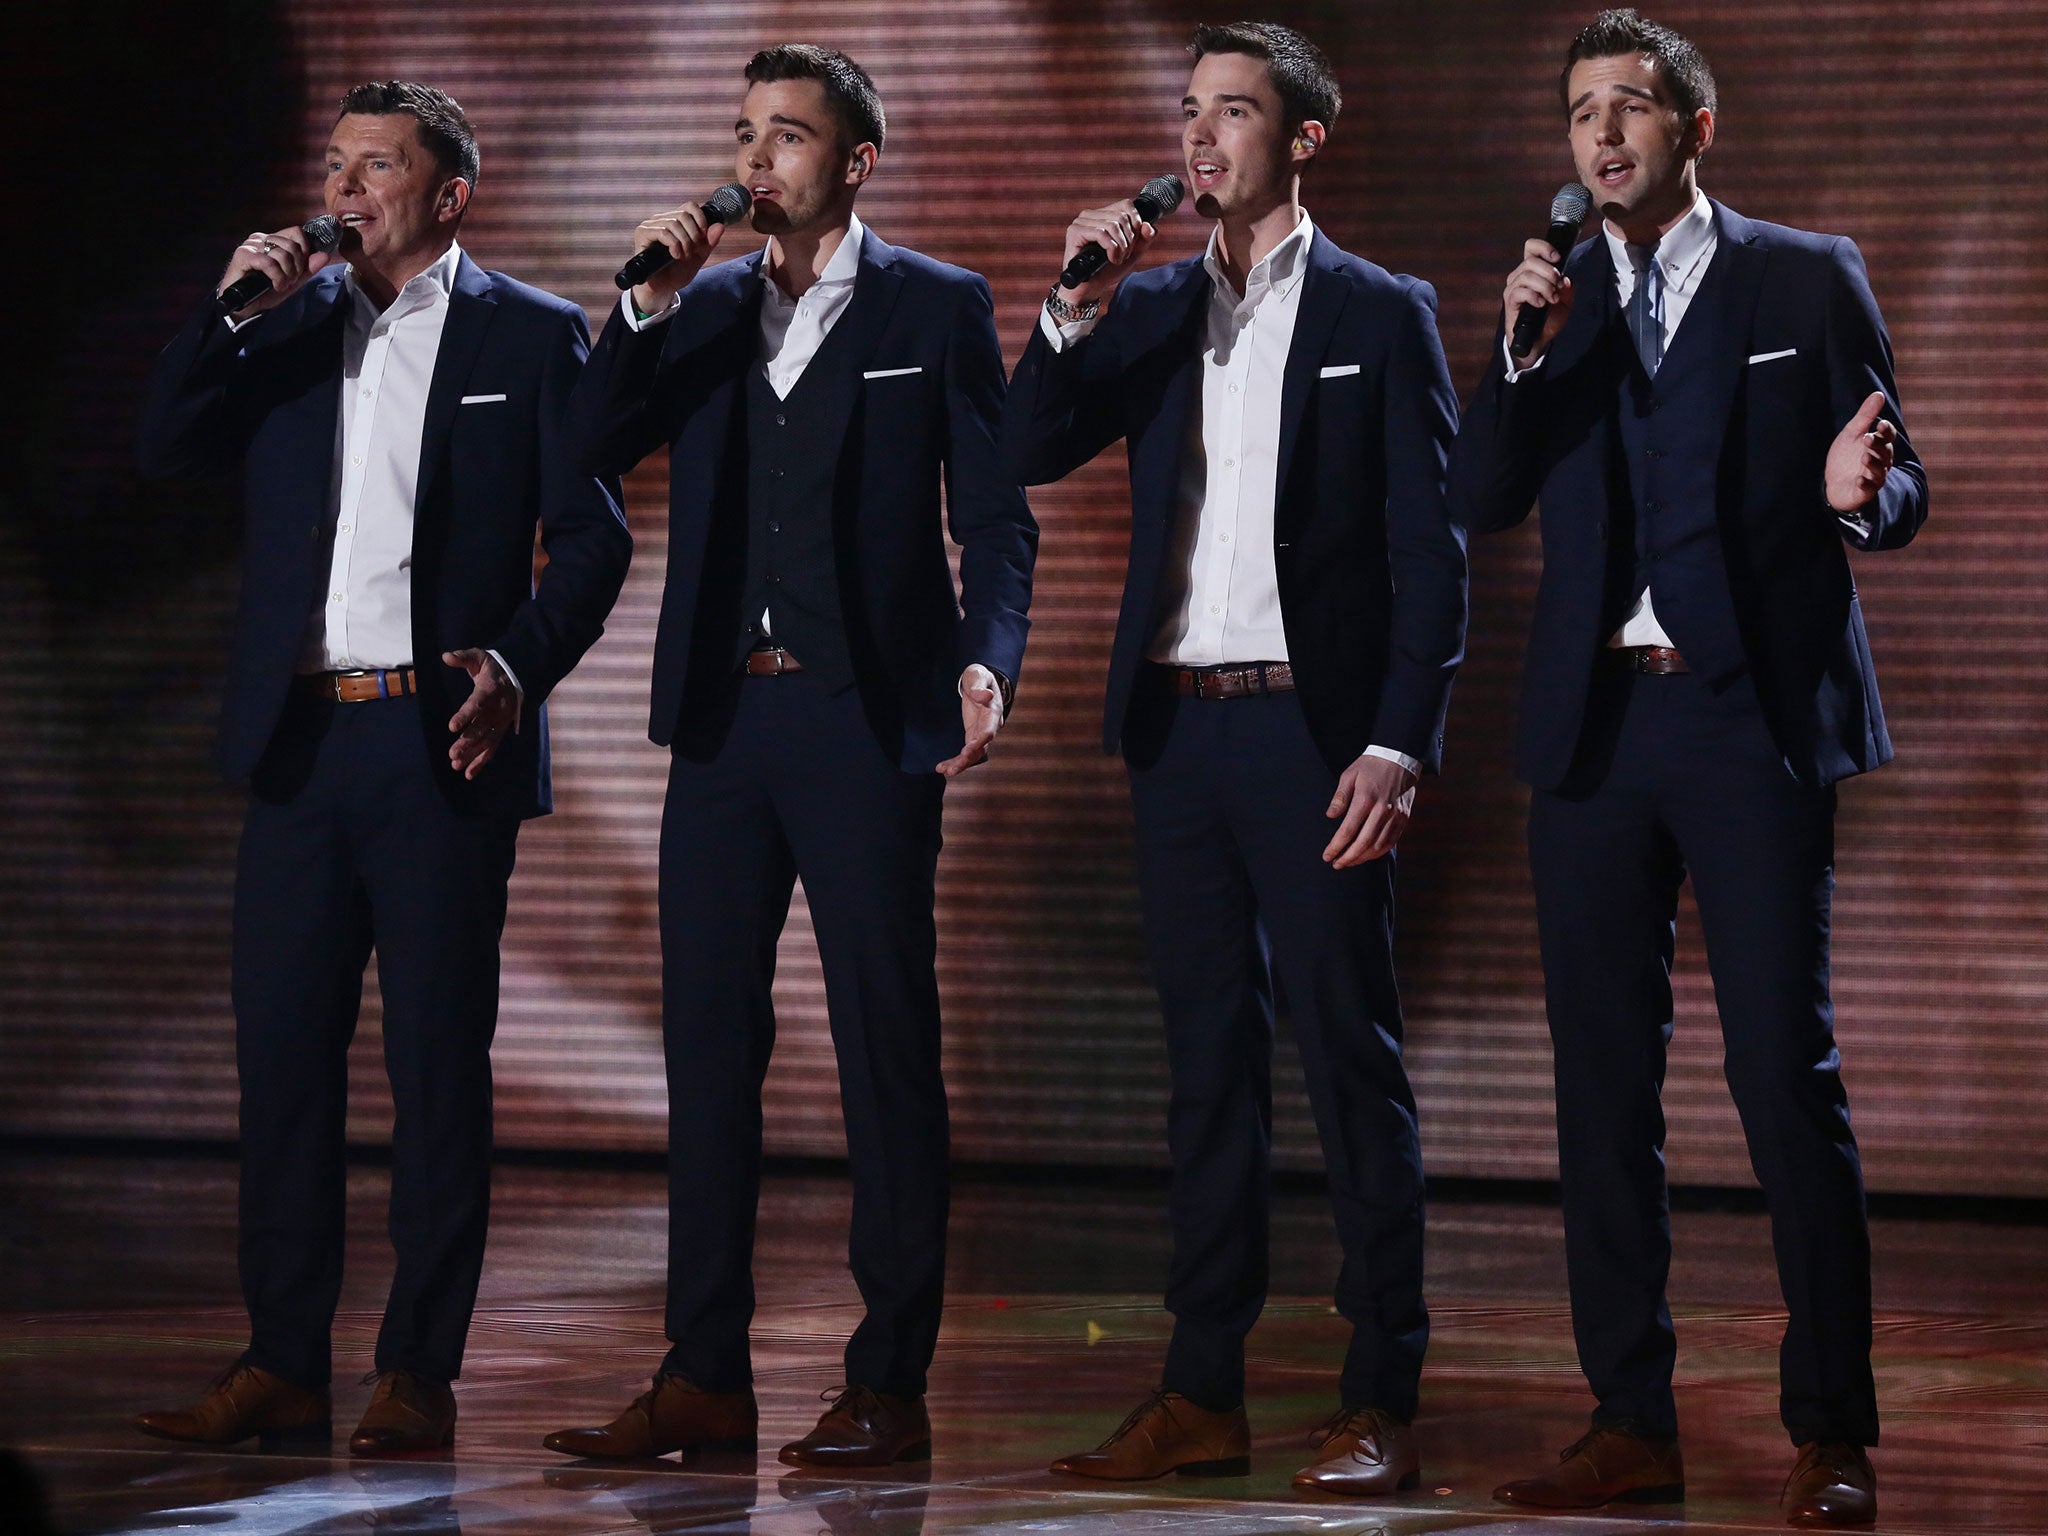 Family vocal group The Neales moved Simon Cowell to tears with their semi-final performance of 'Father and Son' to win the judges vote and go through to the final